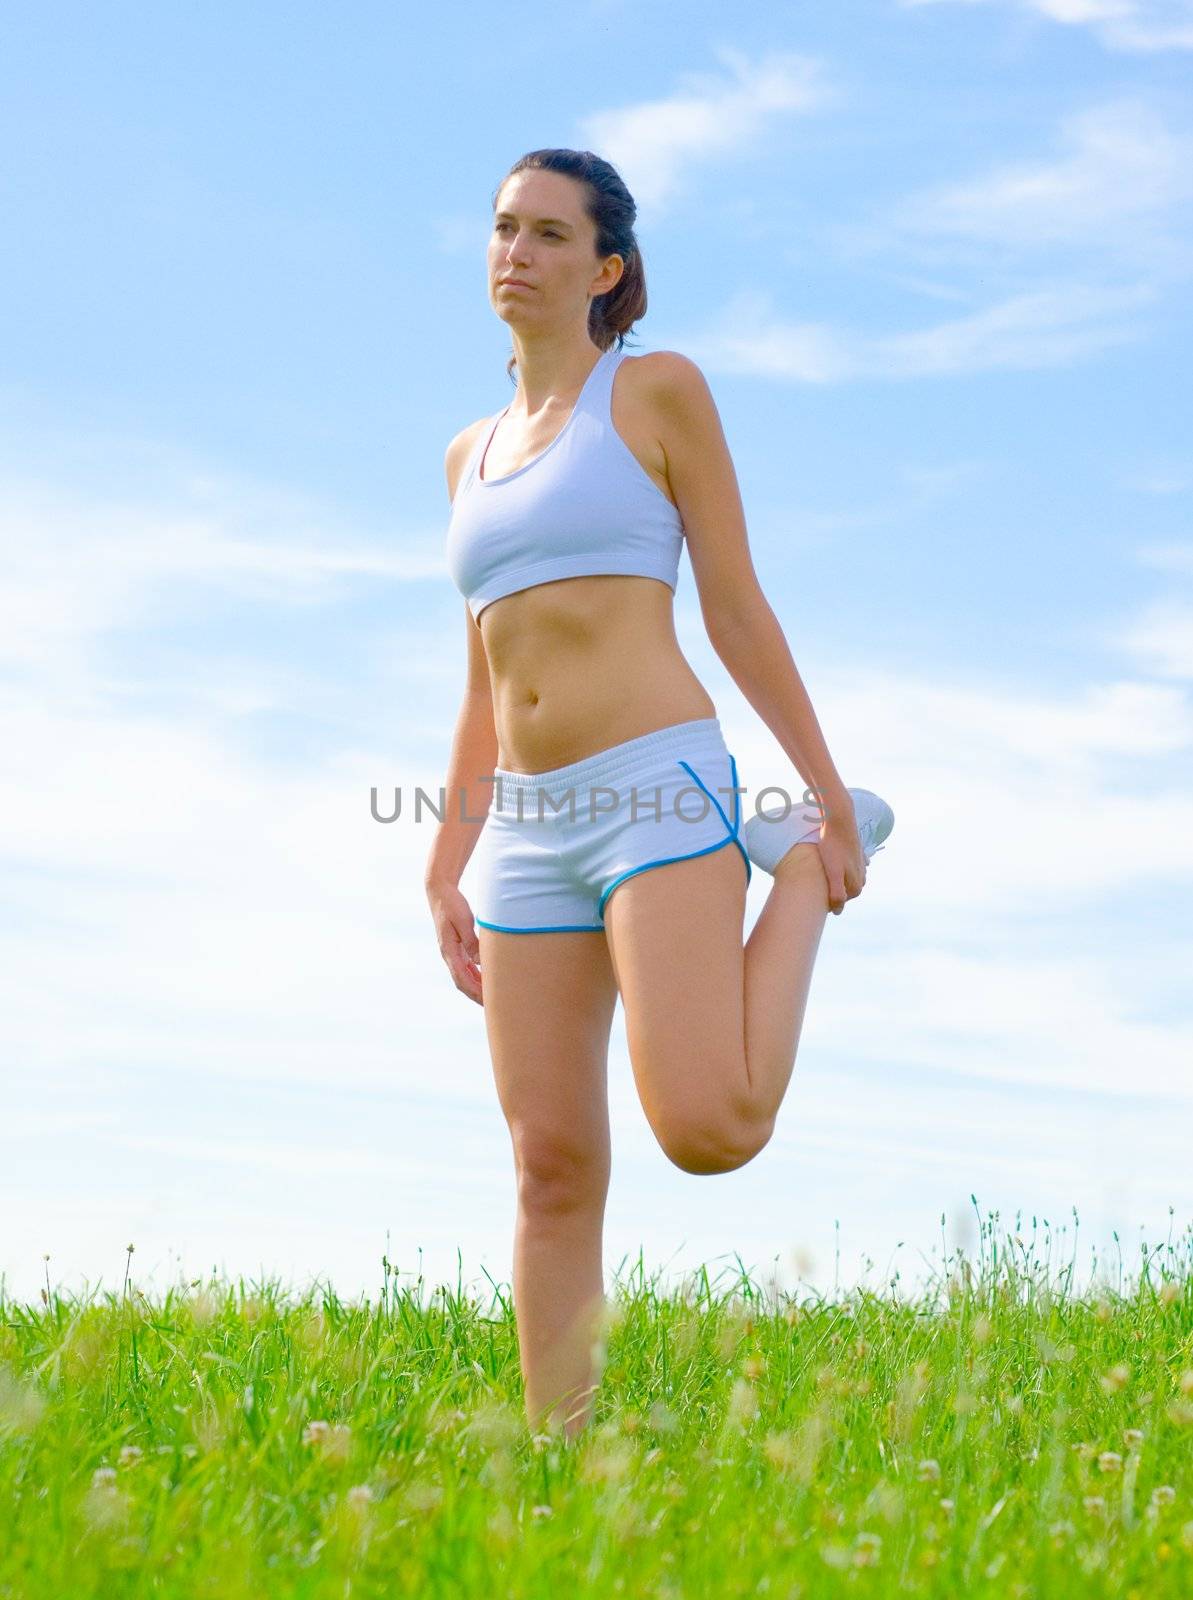 Mature woman athlete practicing in a spring meadow, from a complete series.